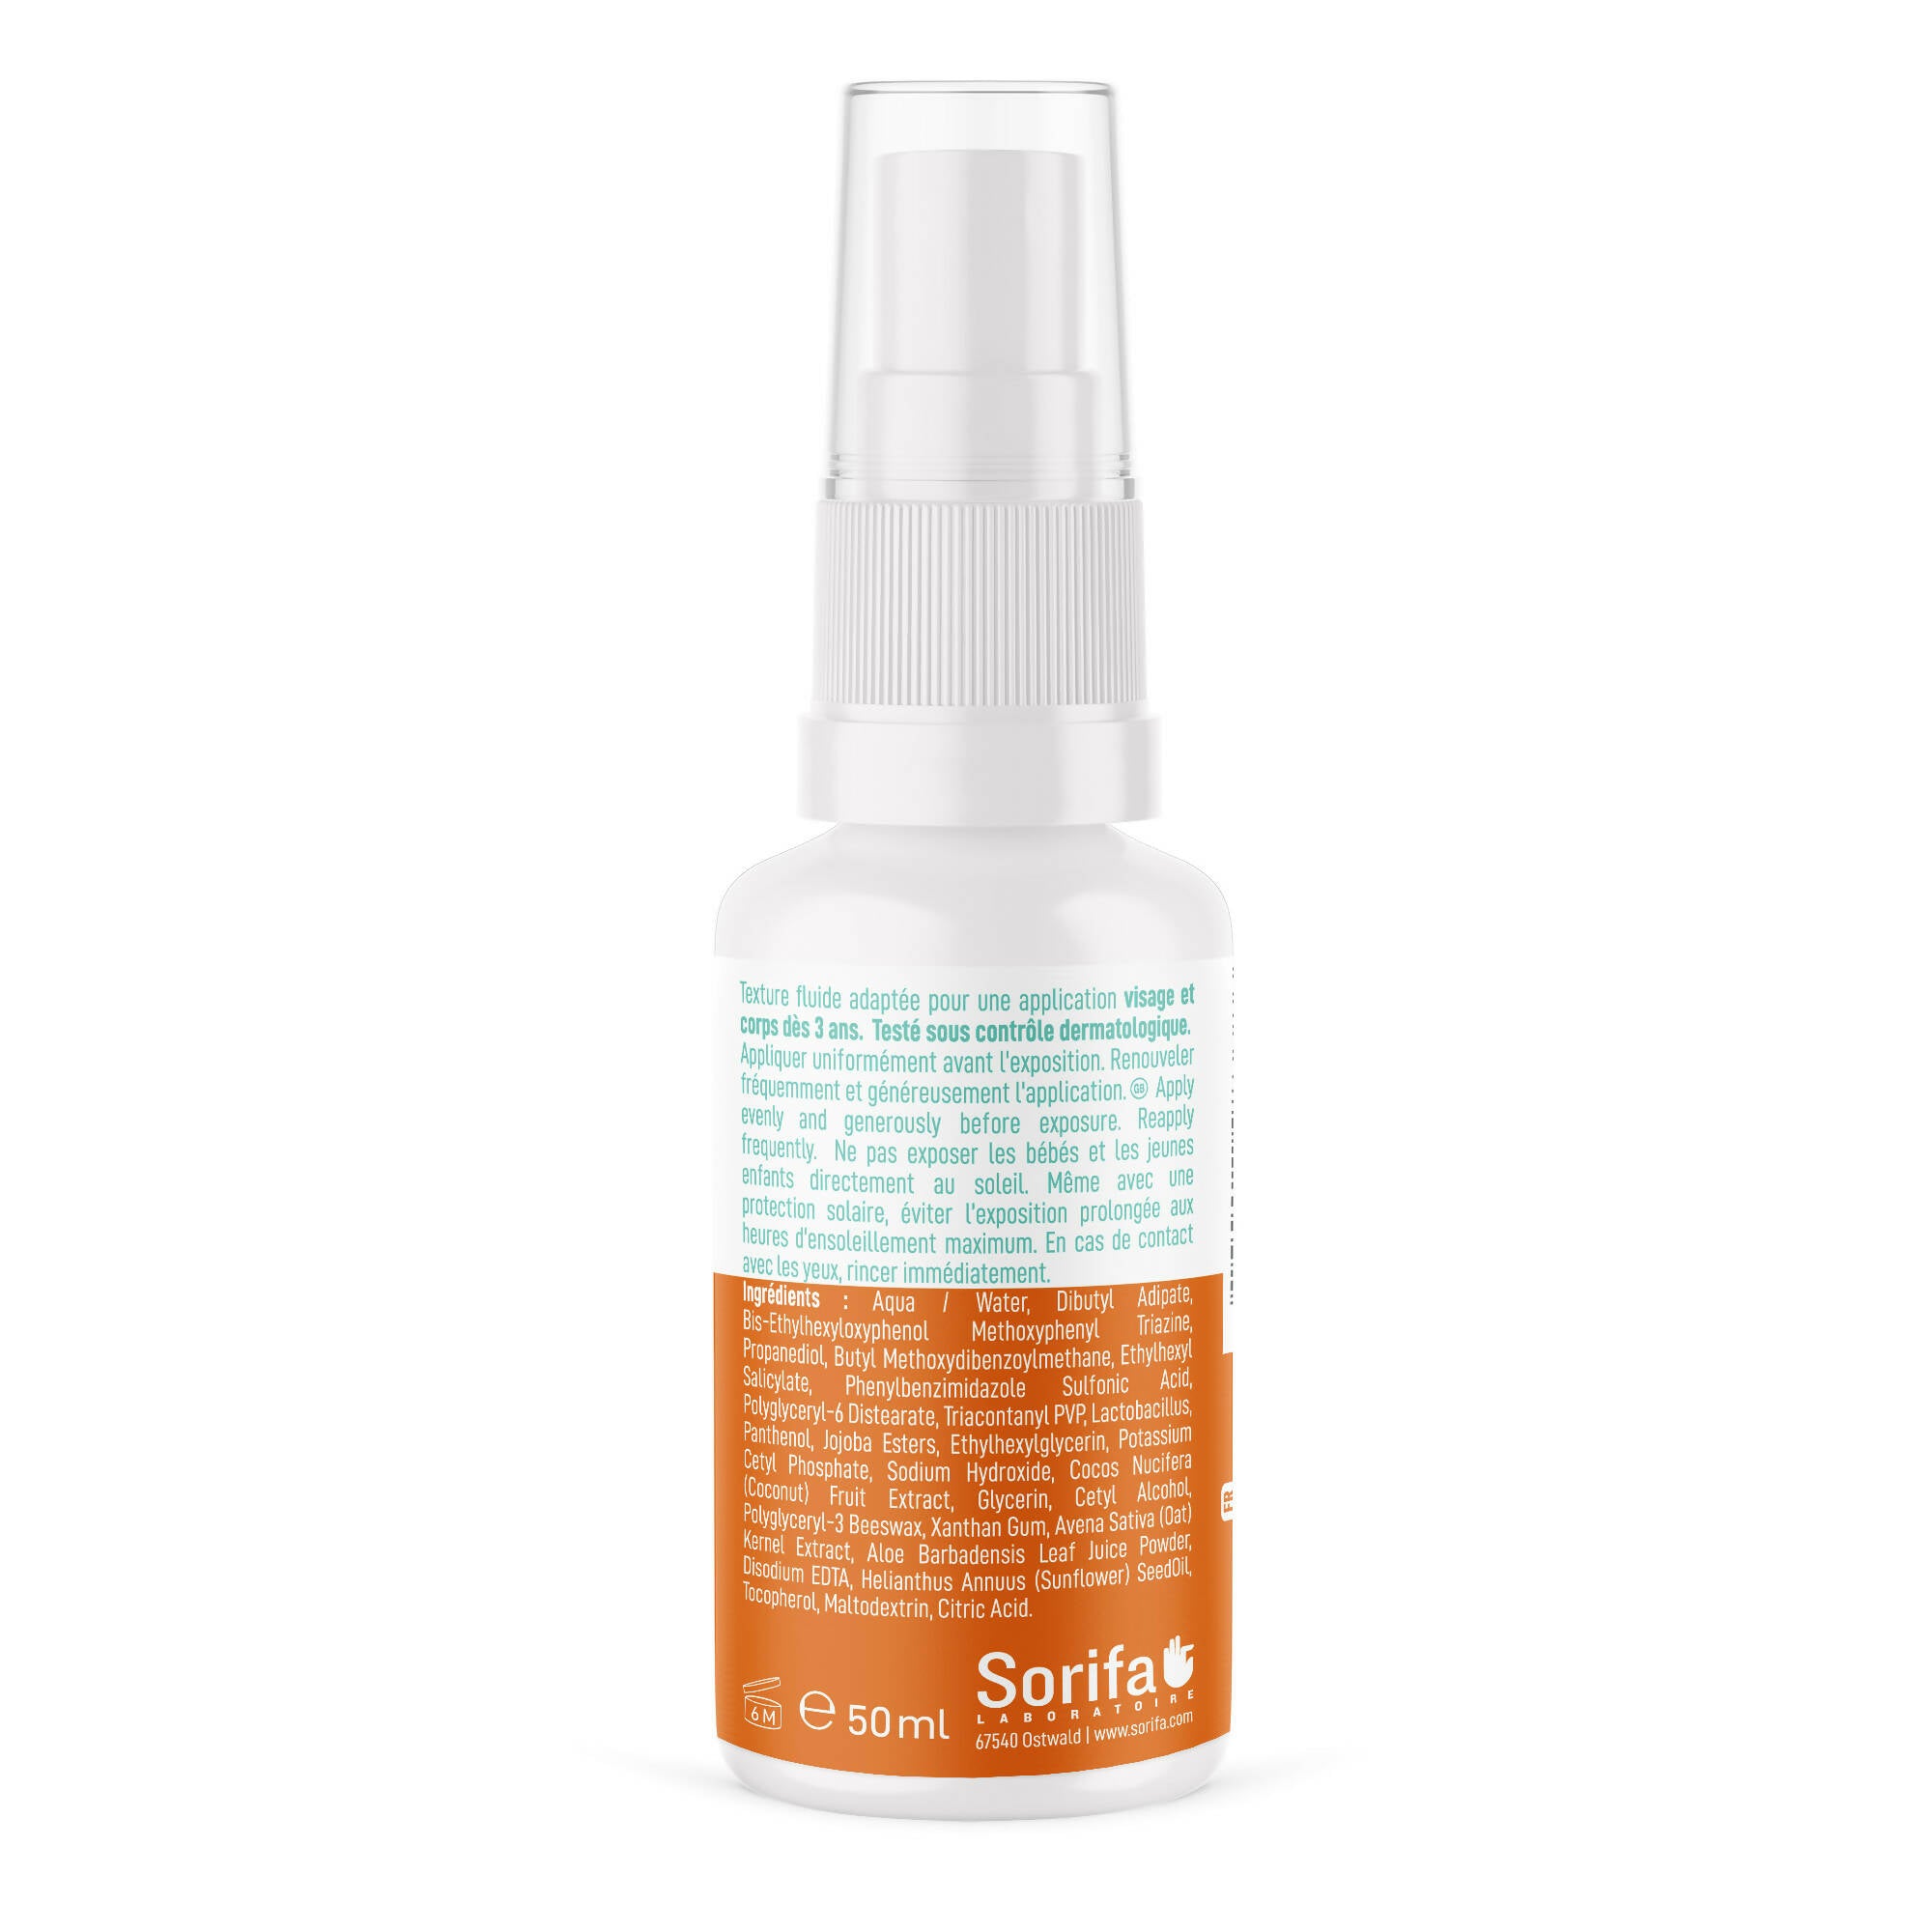 SORIFA - Dermscreen - SPF50+ sun spray - Face and body - Ocean Friendly formula - Water resistant - For the whole family from 3 years old - Made in France - 50 ml spray - 0